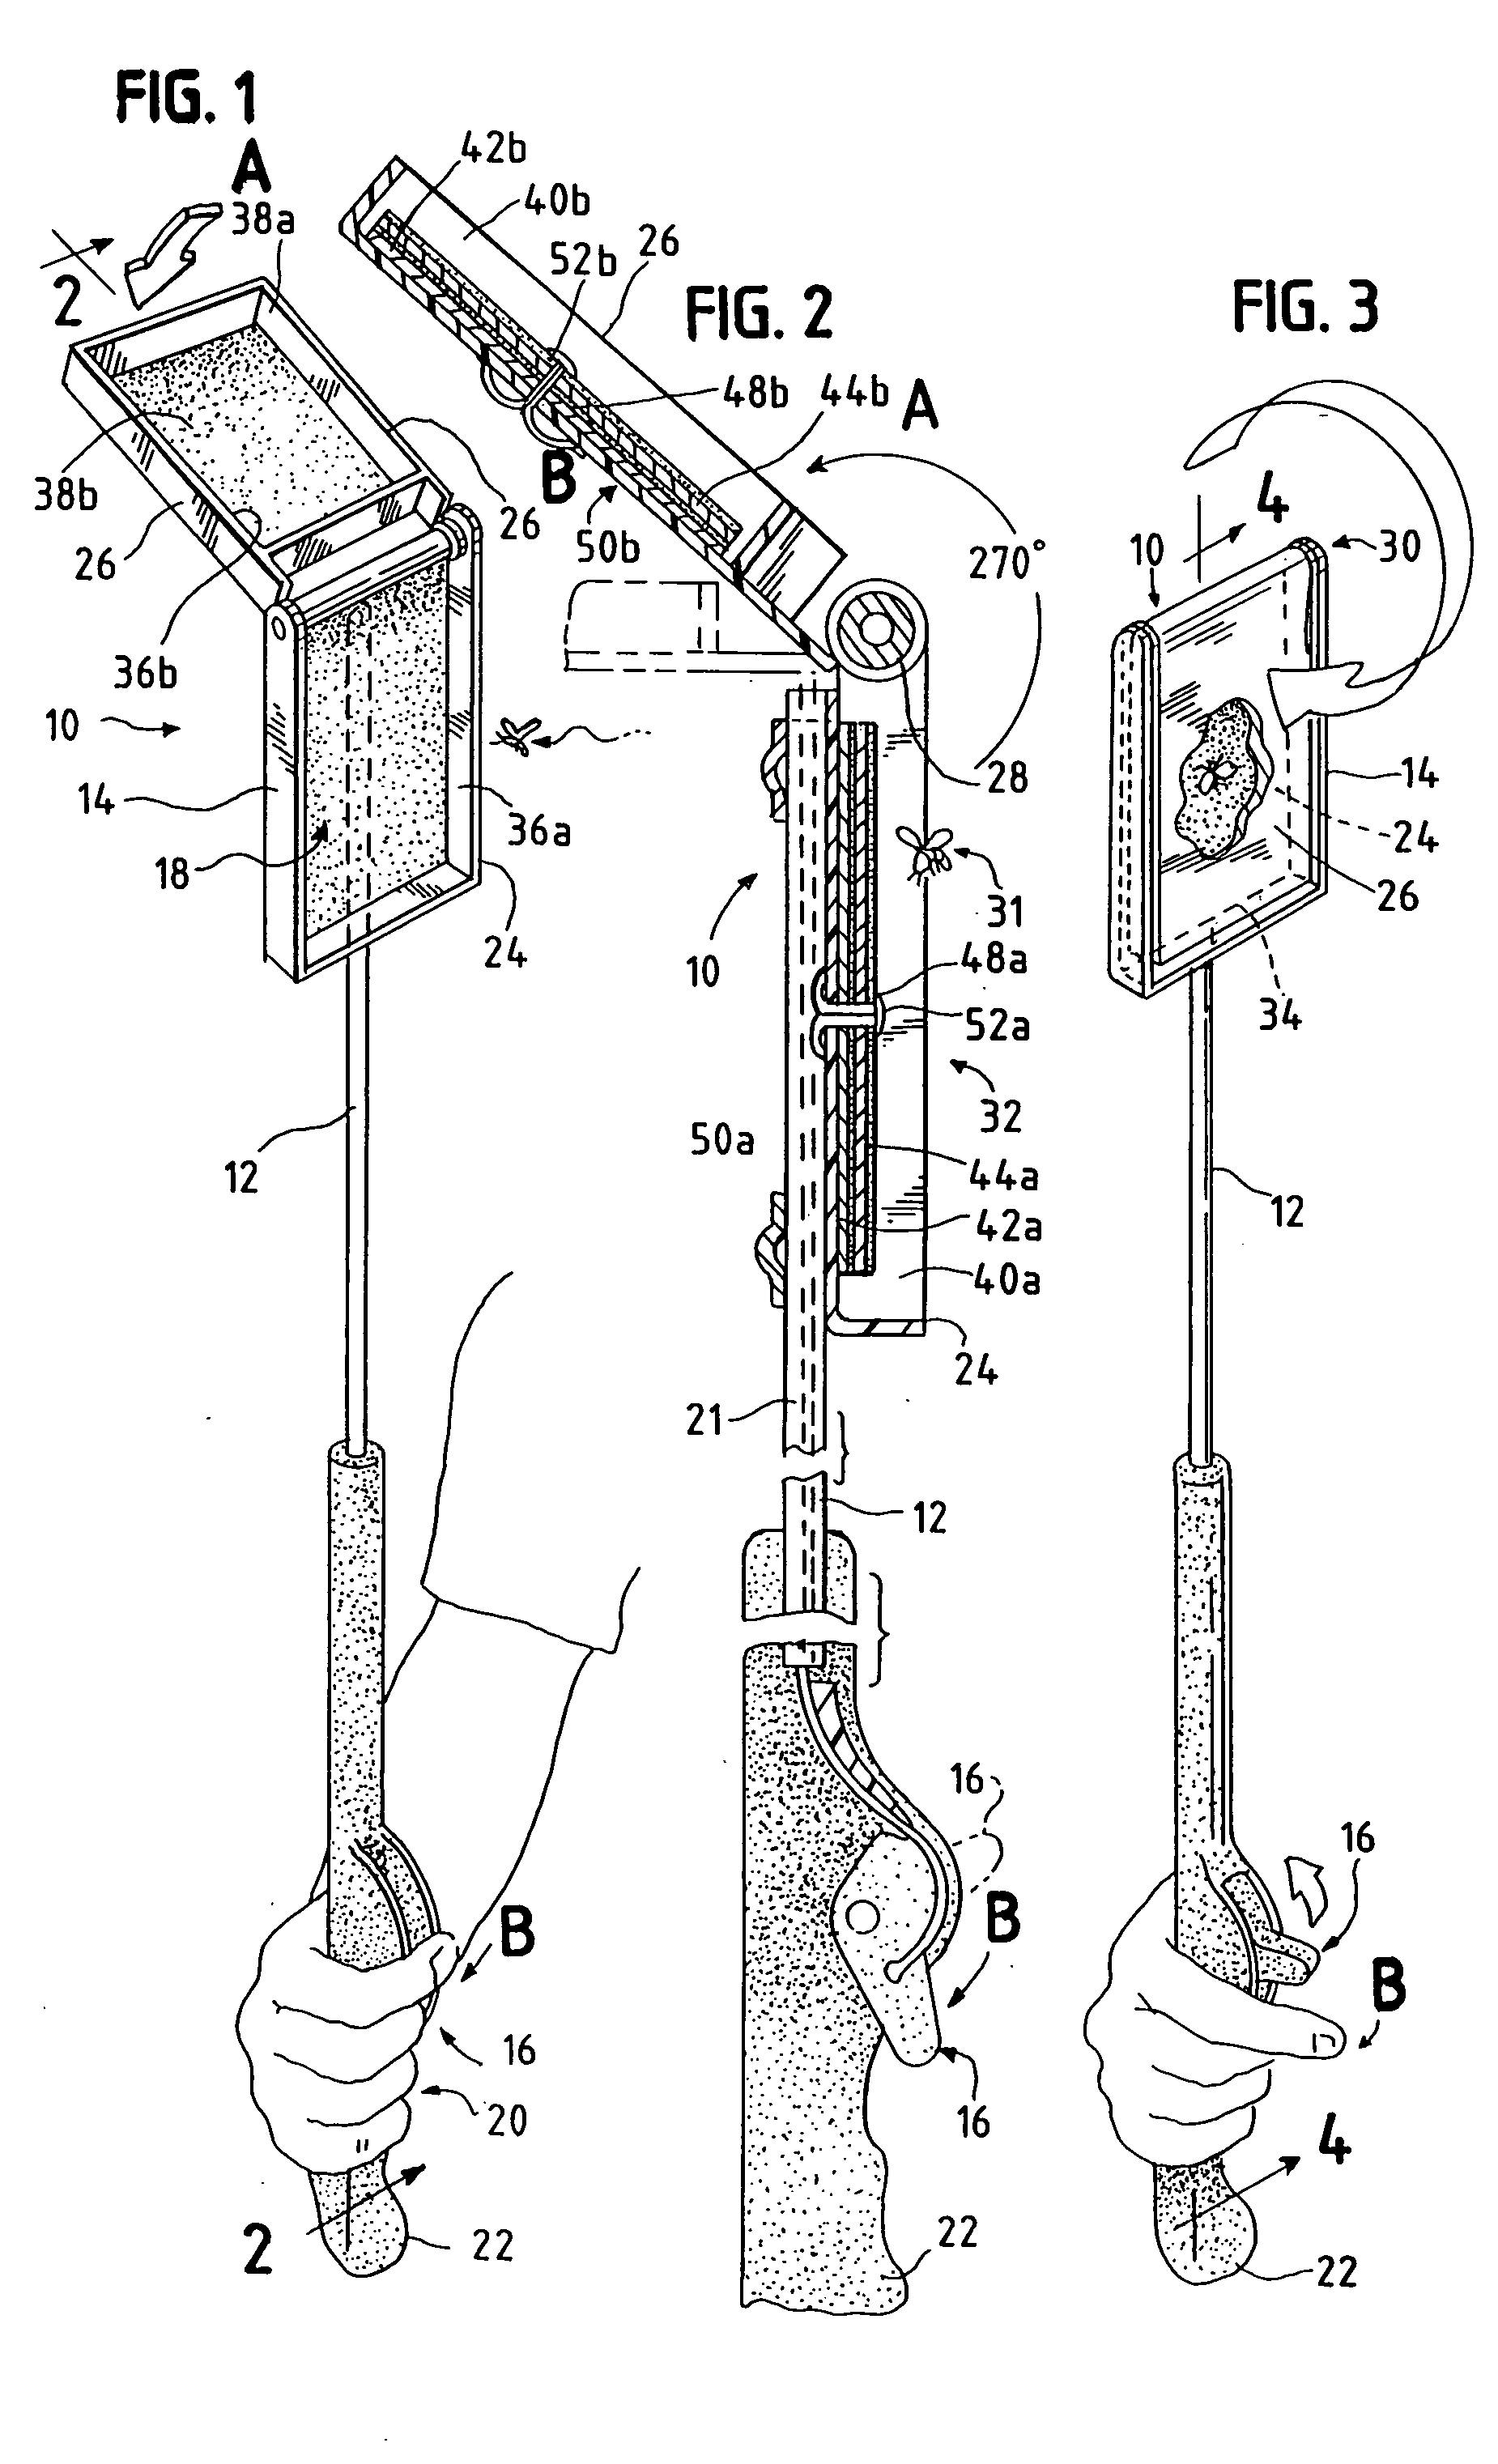 Device for catching insects